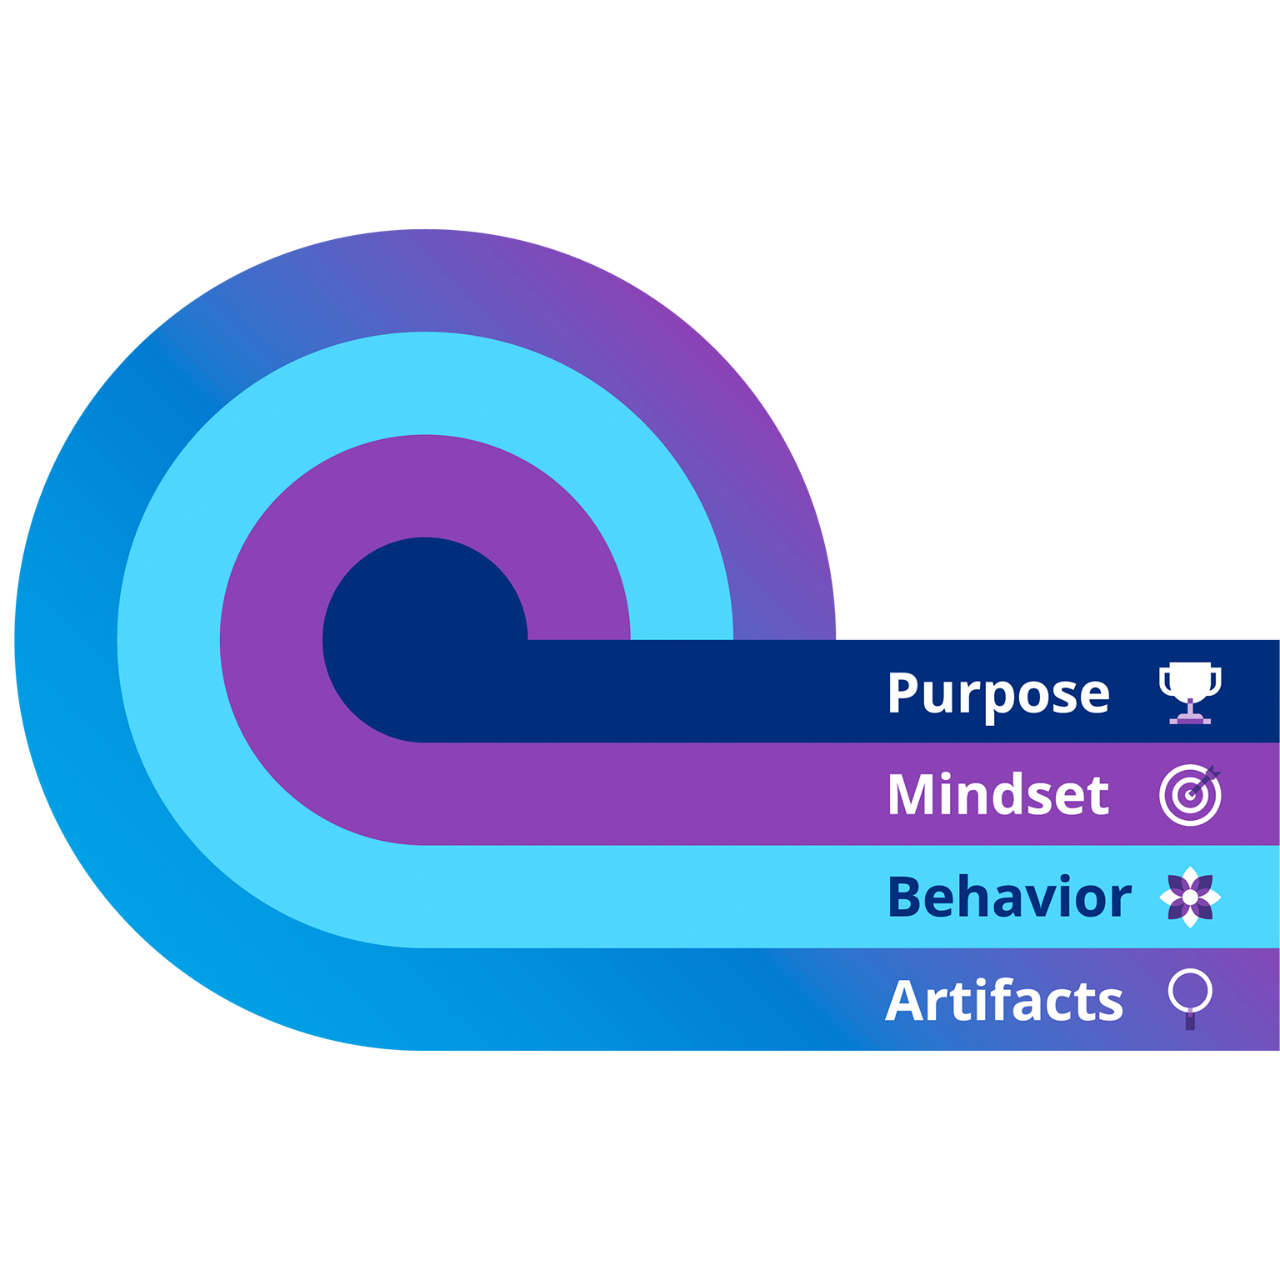 This chart shows that the purpose, artifacts, behaviors and mindsets are all a part of the culture of an organization.